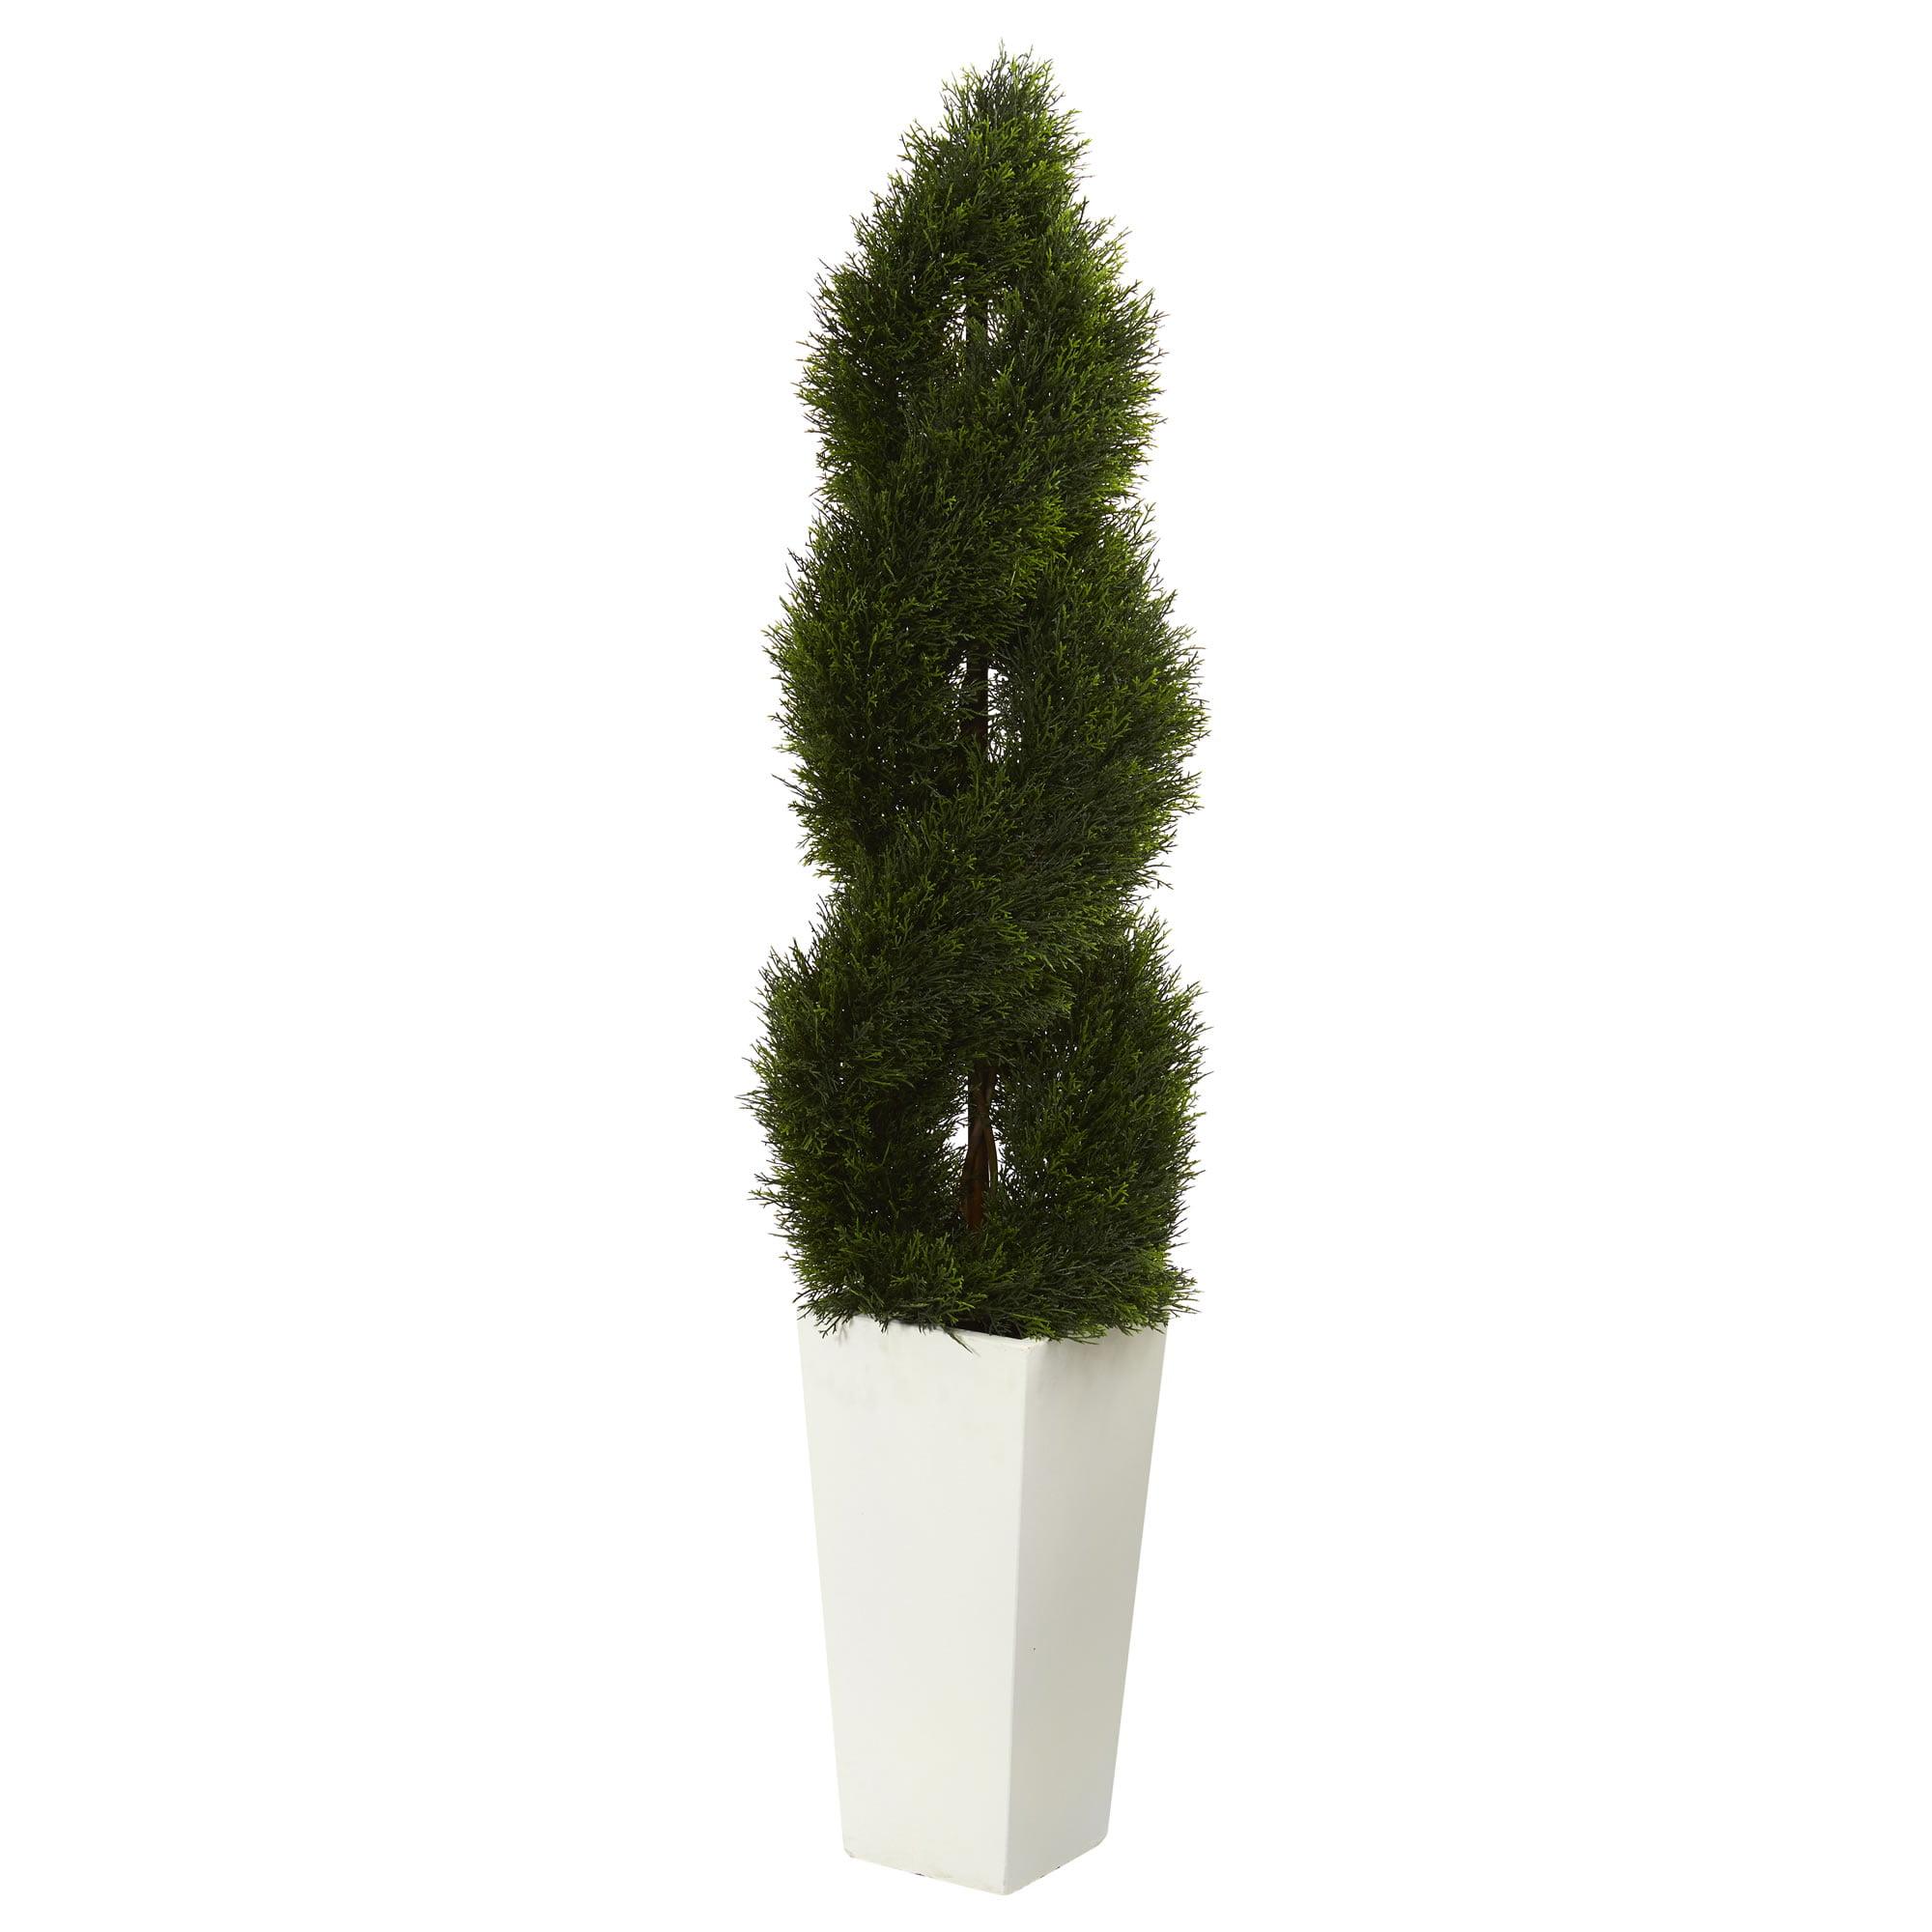 Elegant Winter Silk Double Spiral Topiary in White Tower Planter, 68"